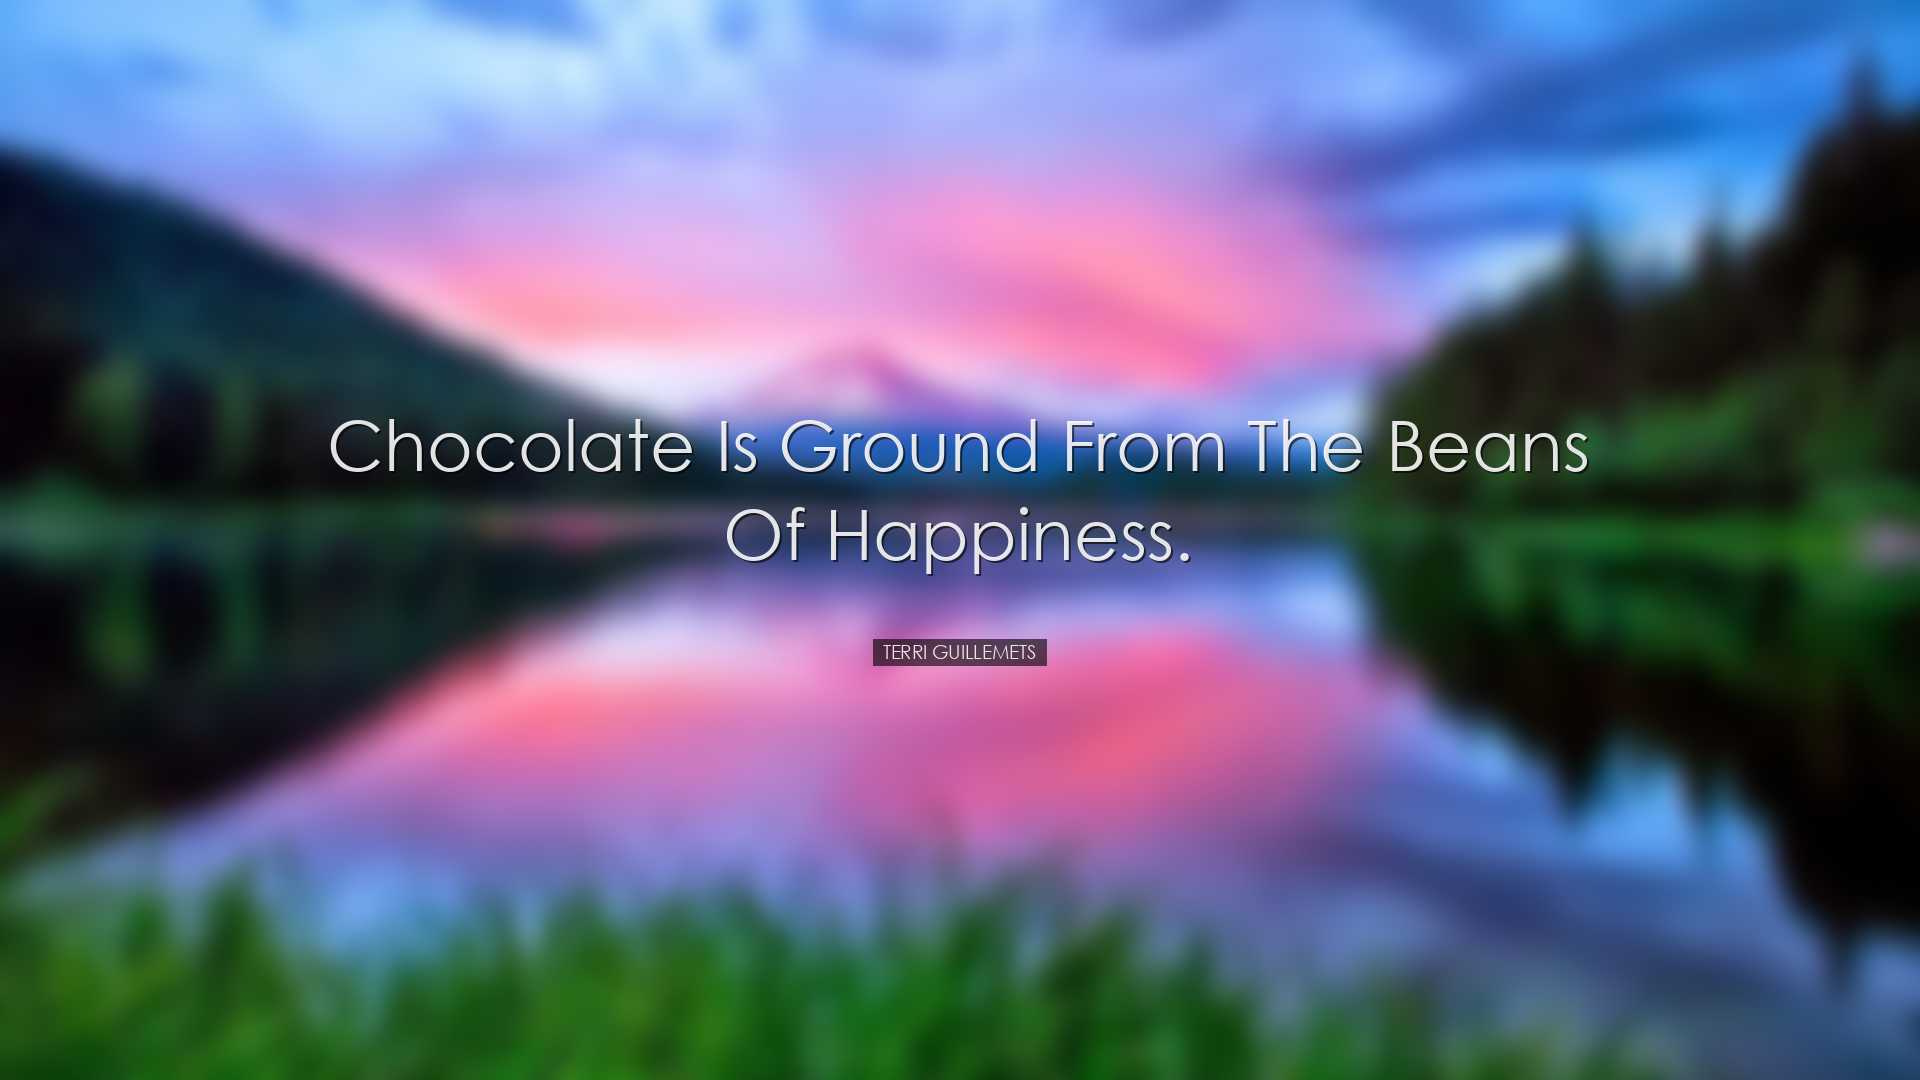 Chocolate is ground from the beans of happiness. - Terri Guillemet